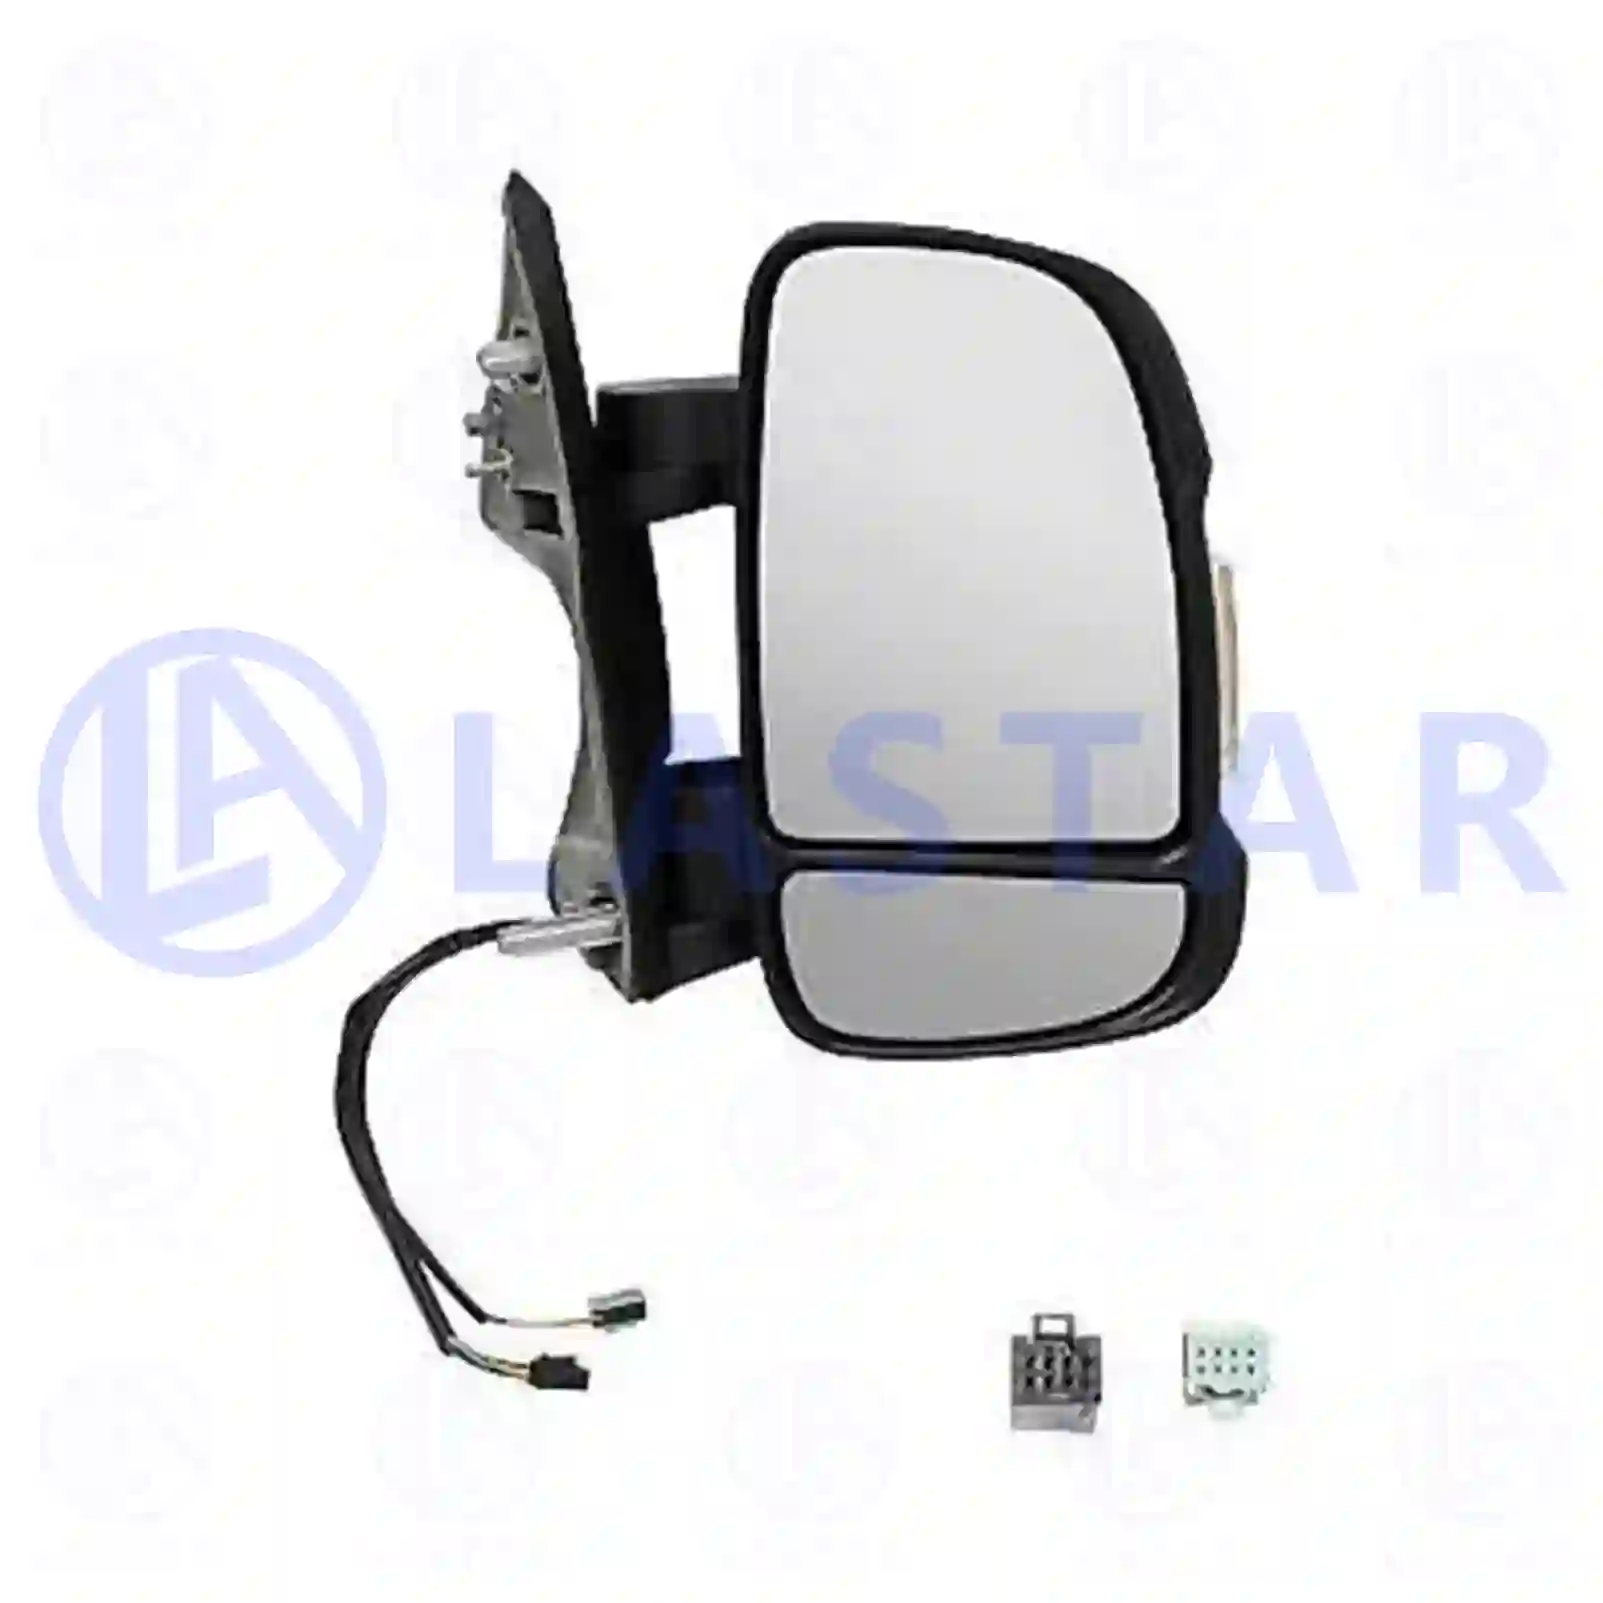 Main mirror, right, heated, electrical, 77721381, 1613689580, 8153W4, 8154KW, 735440391, 735480890, 735620712, 1613689580, 8153W4, 8154KW ||  77721381 Lastar Spare Part | Truck Spare Parts, Auotomotive Spare Parts Main mirror, right, heated, electrical, 77721381, 1613689580, 8153W4, 8154KW, 735440391, 735480890, 735620712, 1613689580, 8153W4, 8154KW ||  77721381 Lastar Spare Part | Truck Spare Parts, Auotomotive Spare Parts